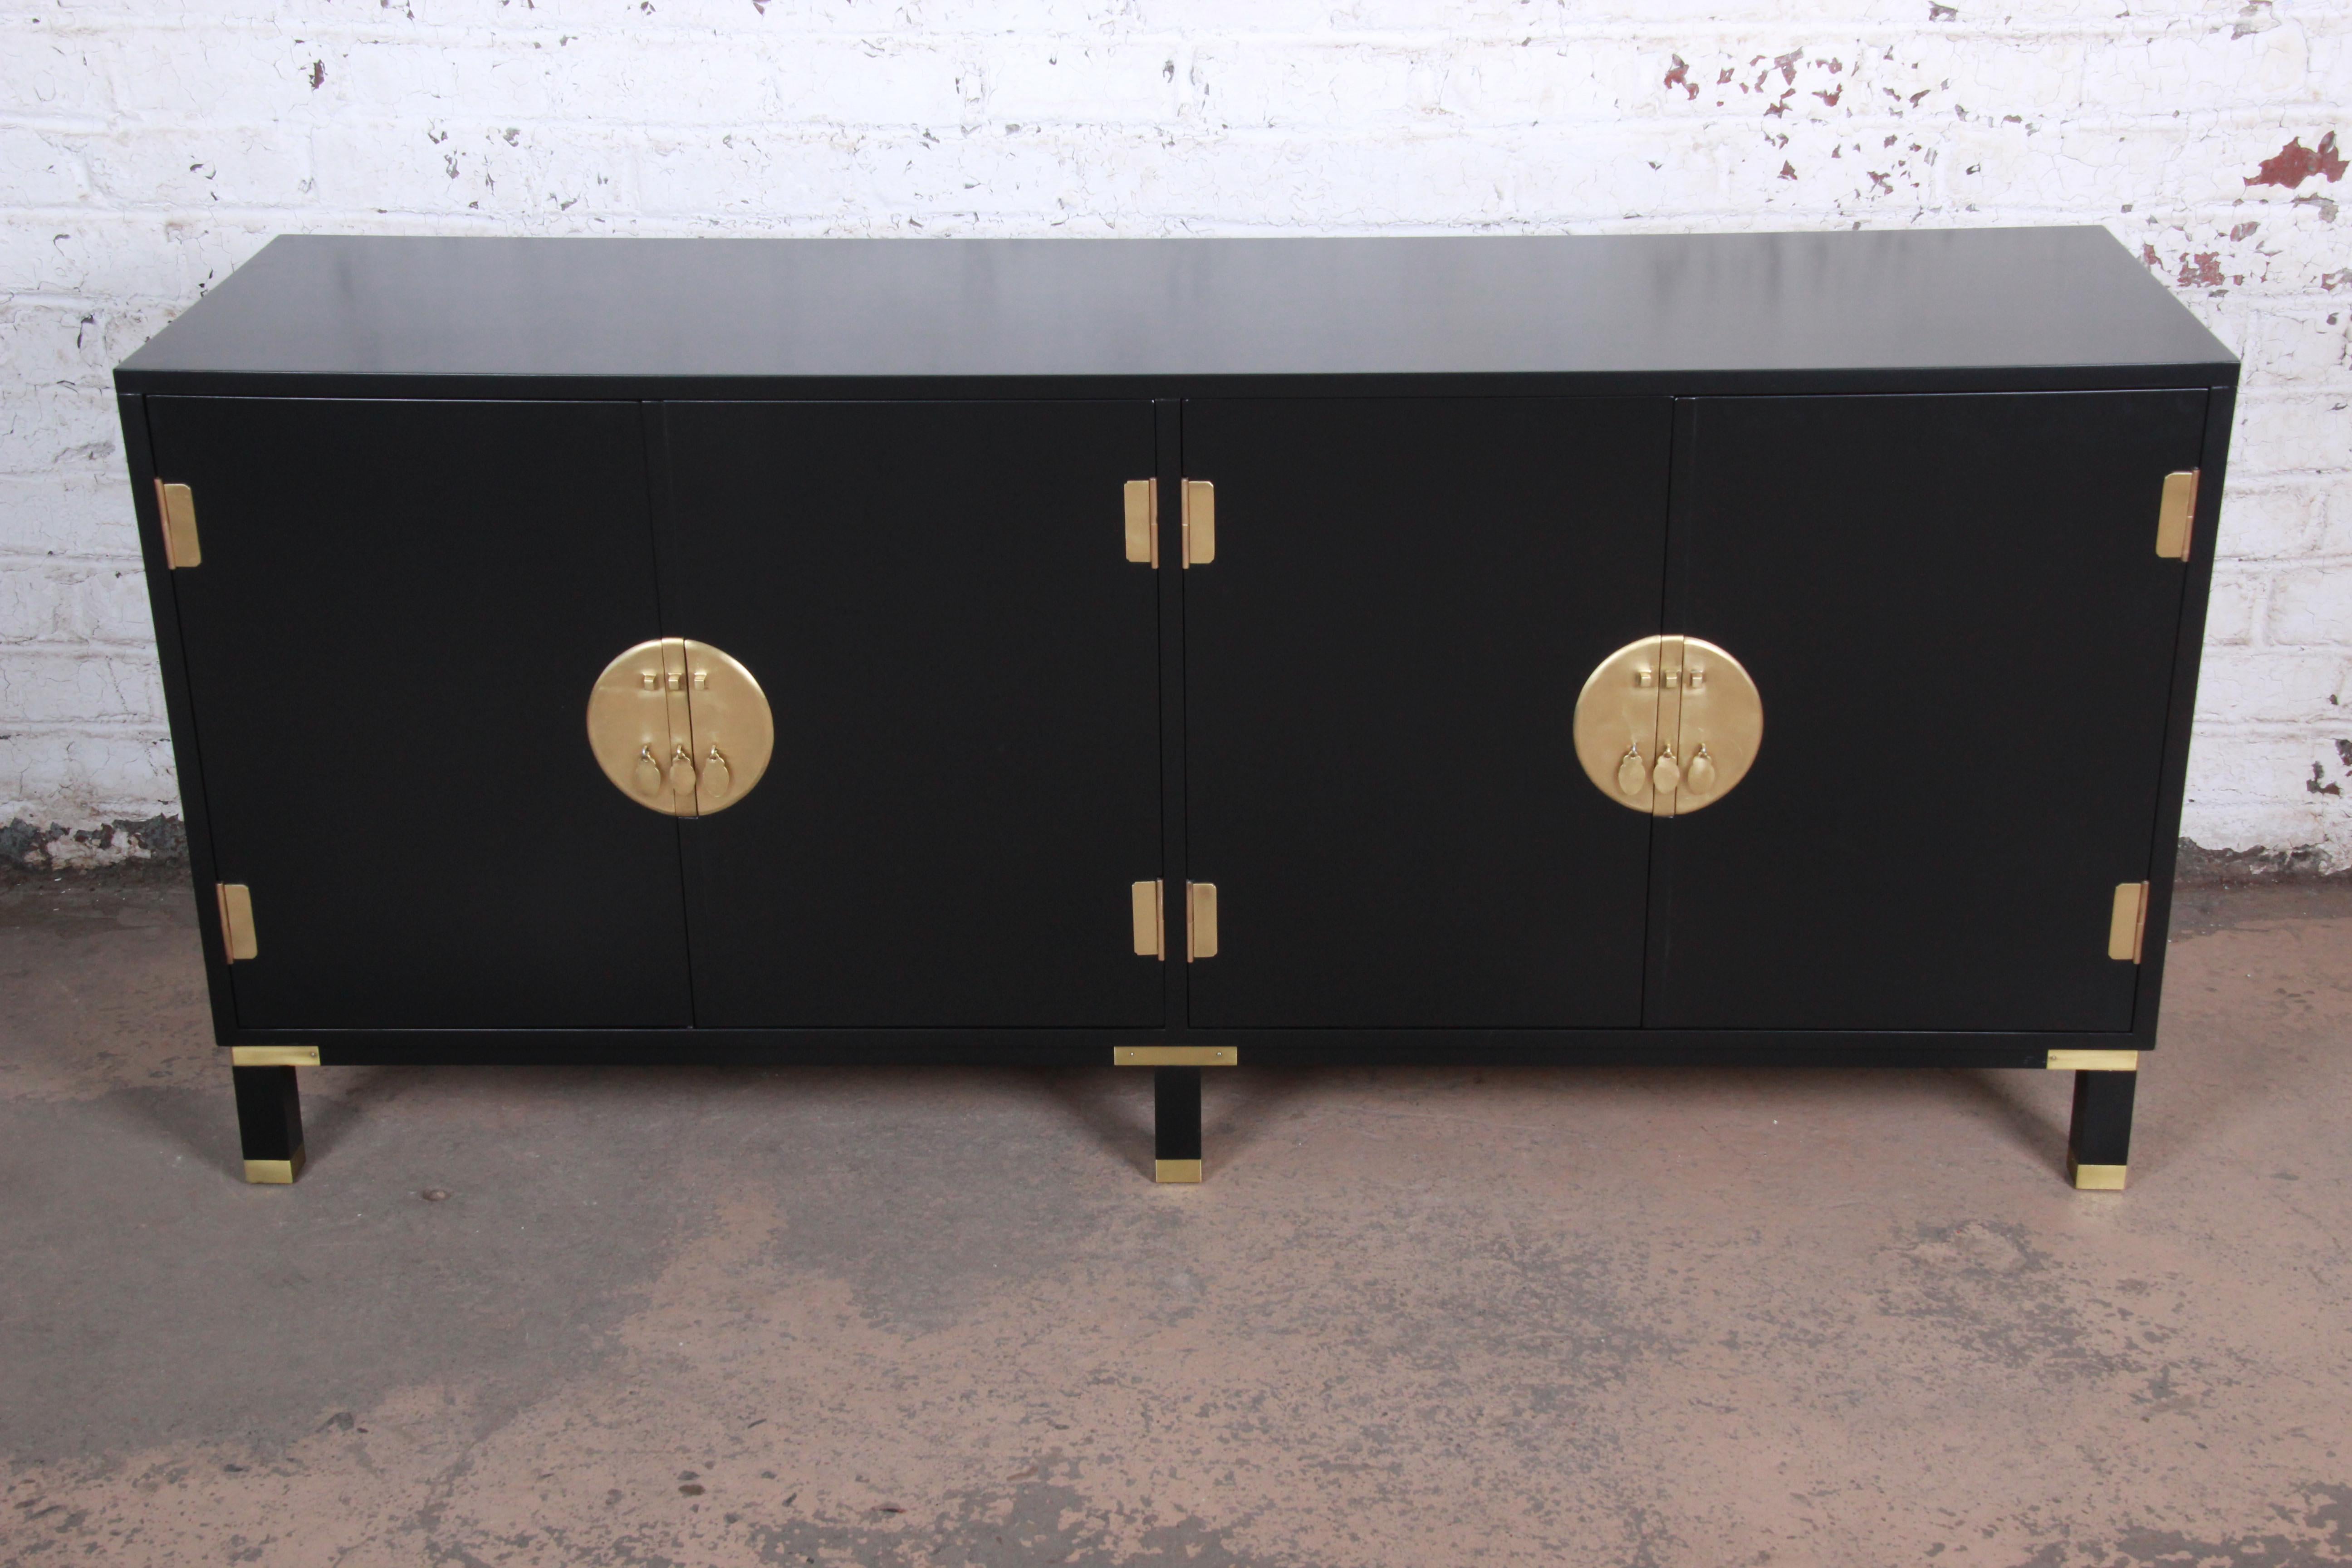 An exceptional Hollywood Regency chinoiserie sideboard credenza by Michael Taylor for Baker Furniture. The credenza features stunning ebonized wood with brass feet and accents and original Asian-inspired brass hardware. It offers ample storage, with